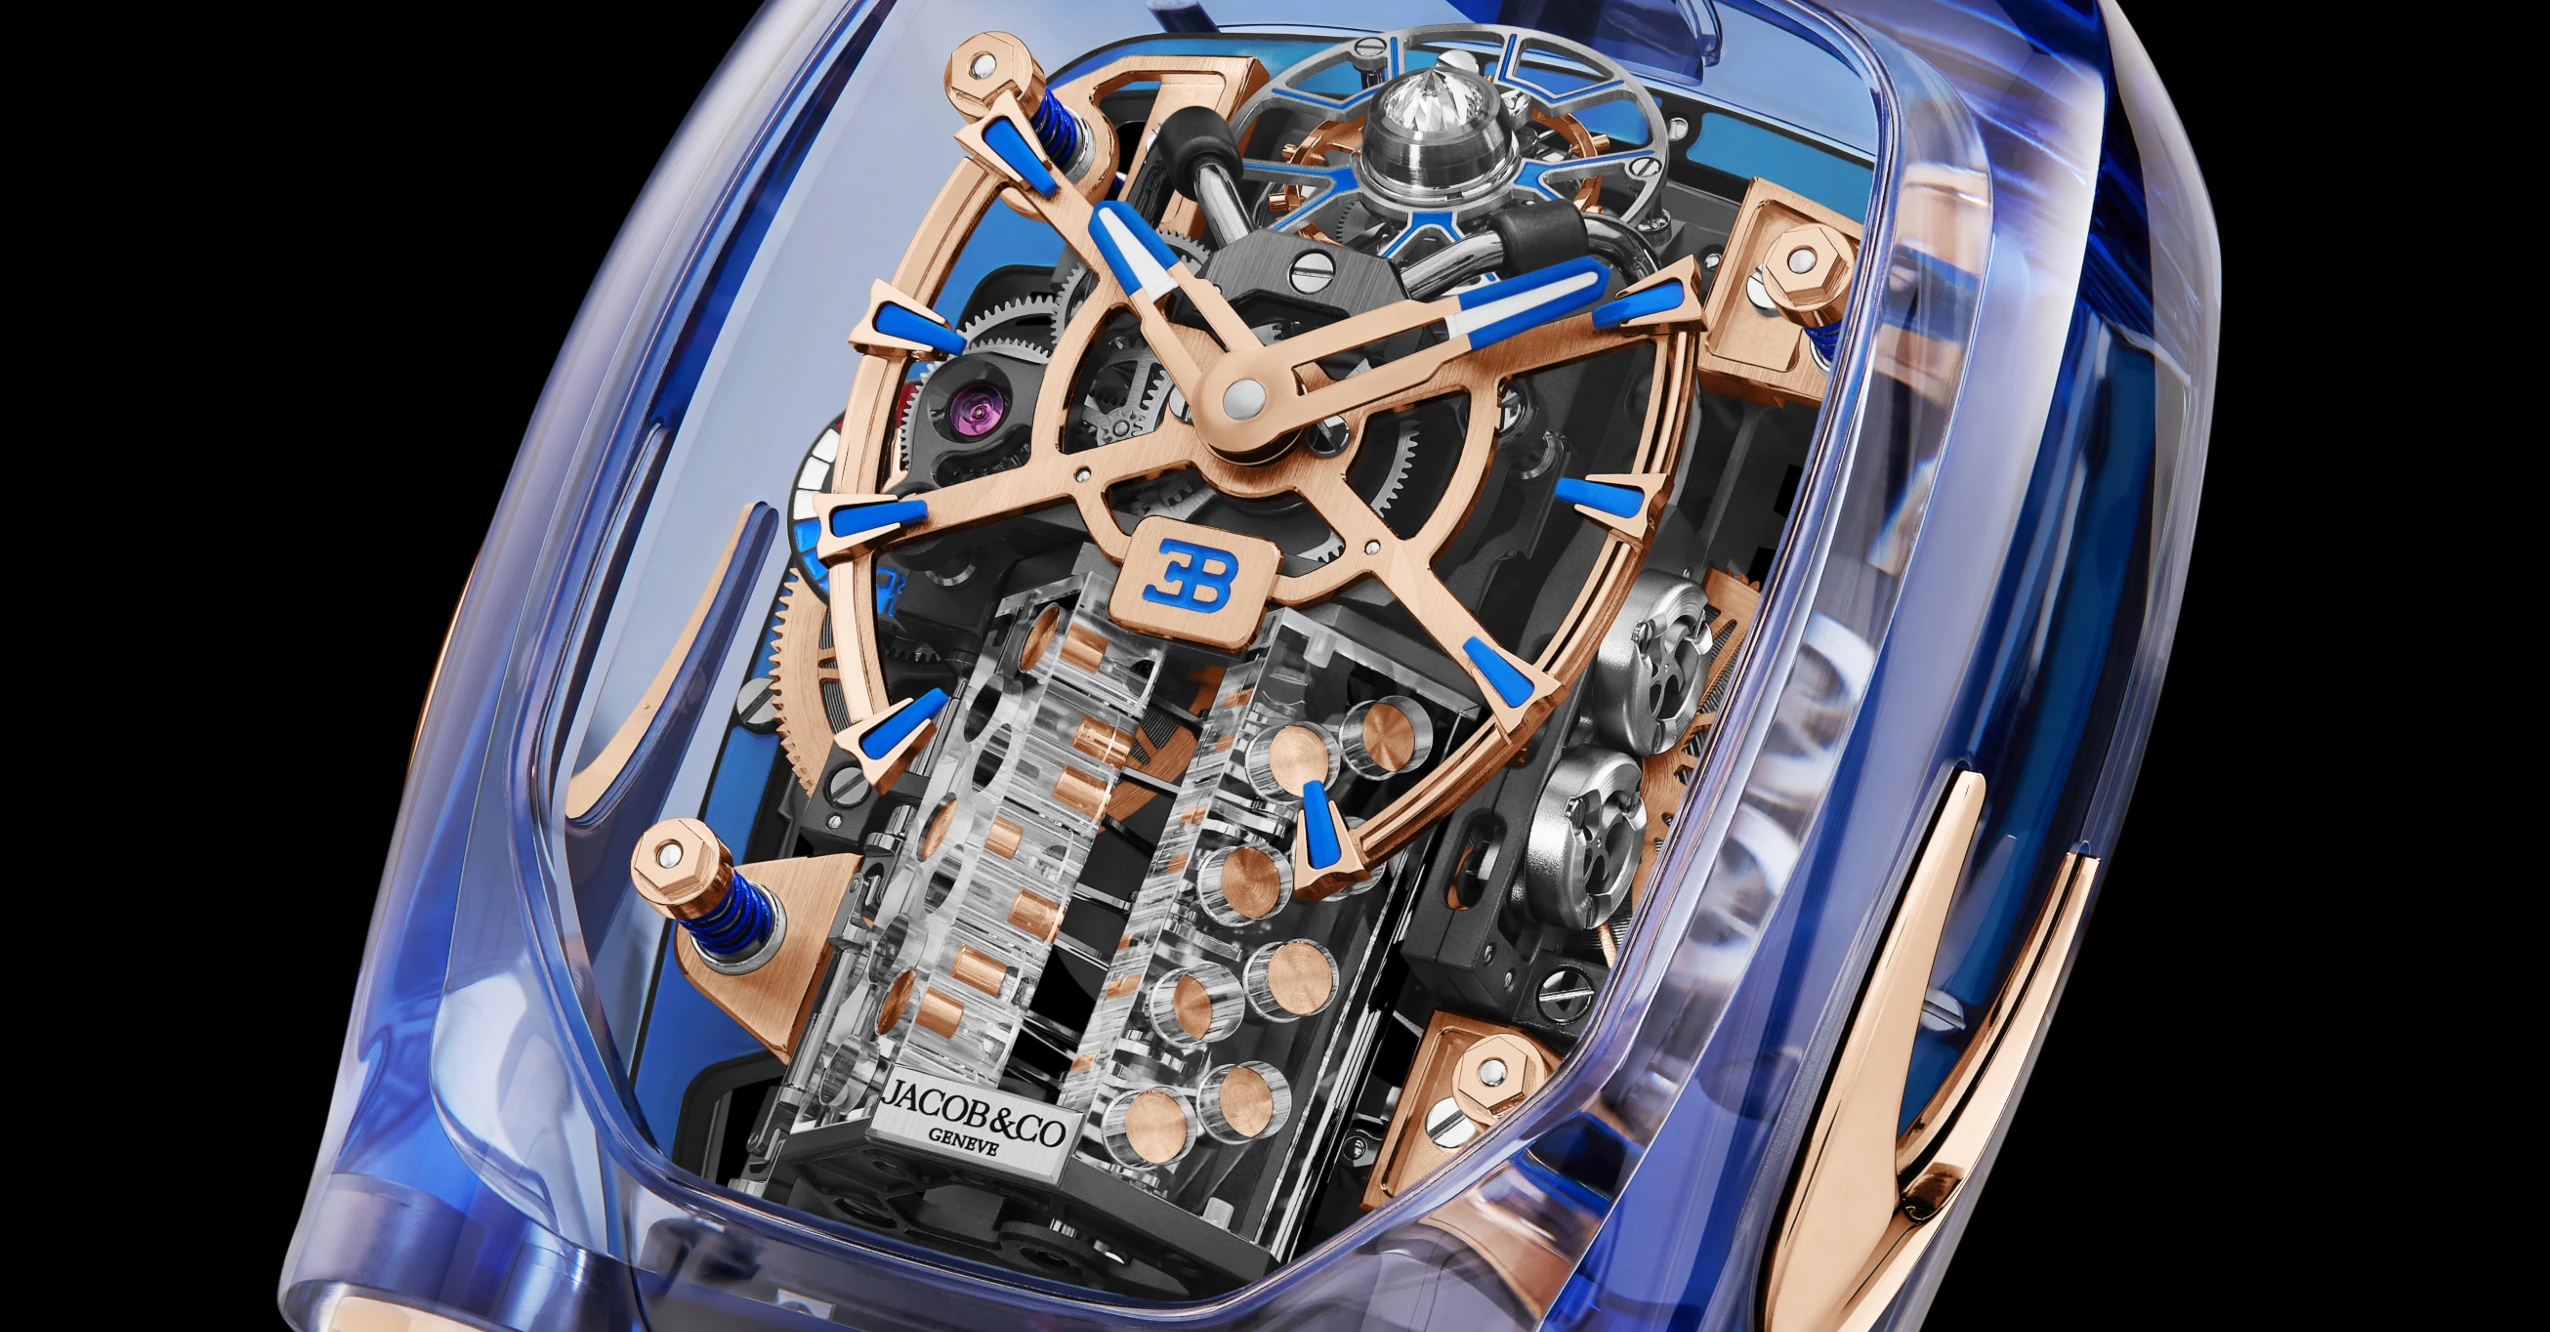 Jacob & Co.’s Ridiculous New Watch Houses a Working Bugatti W16 Engine